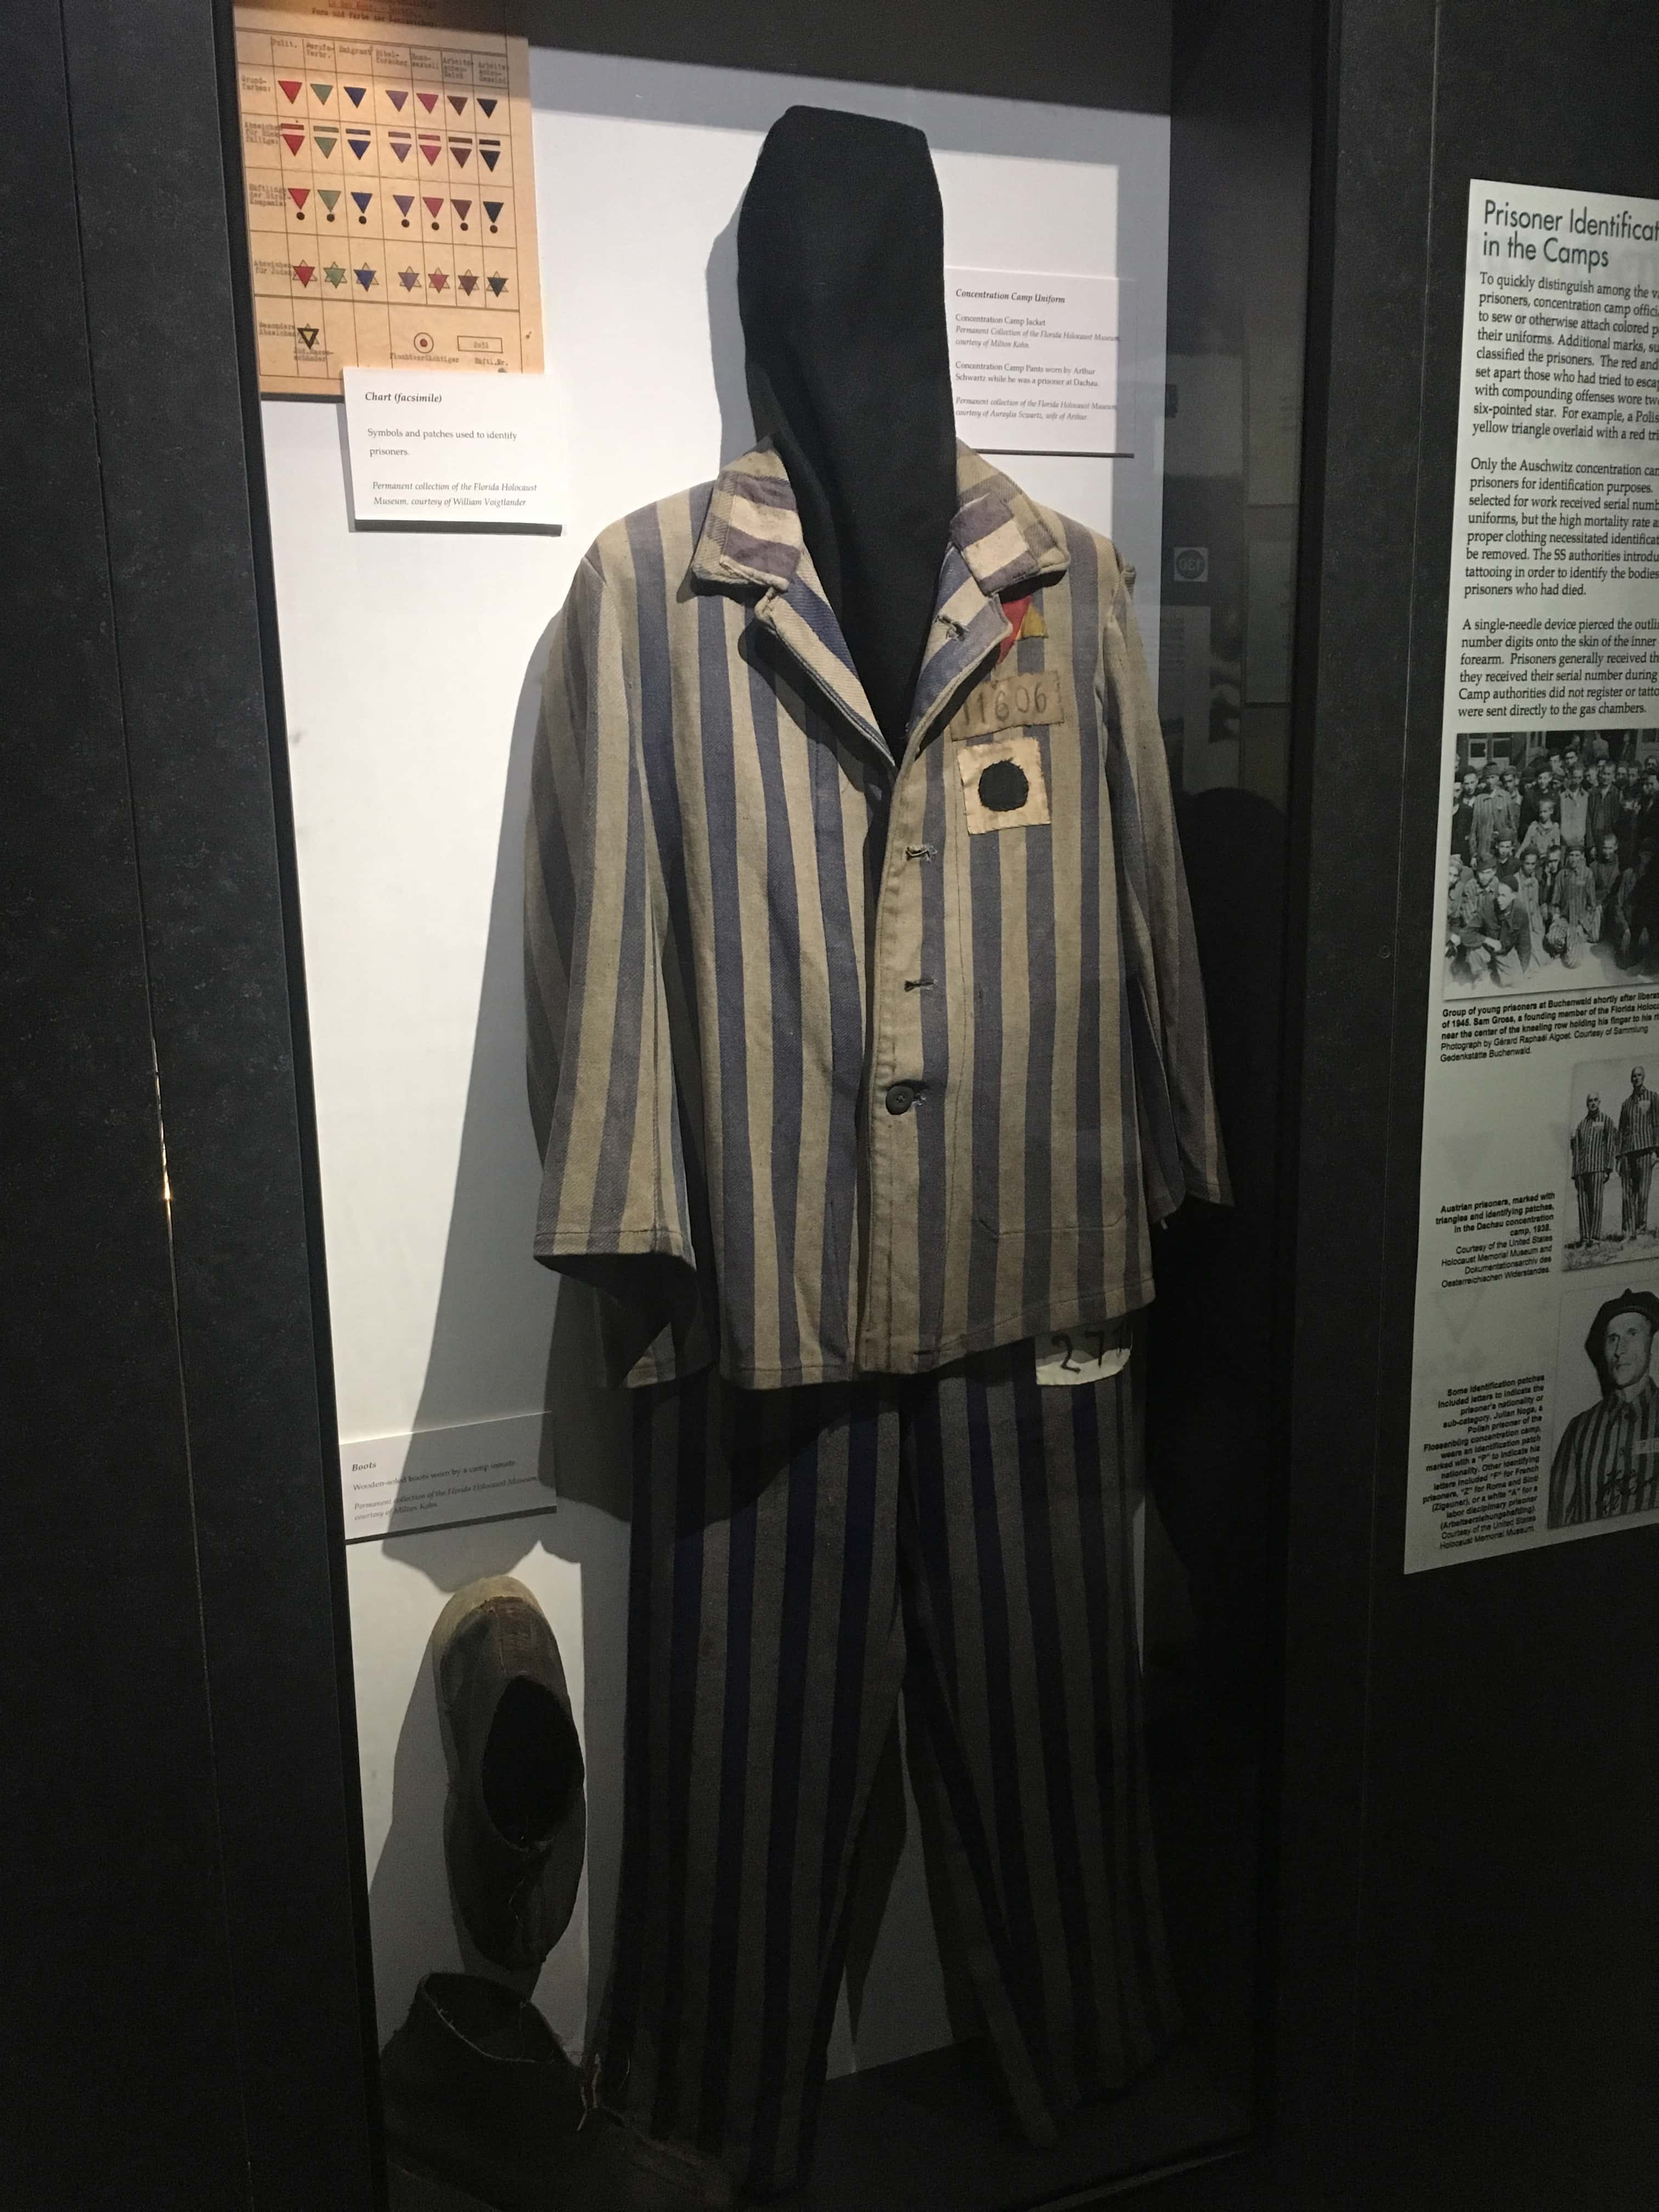 Concentration camp uniform at the Florida Holocaust Museum in St. Petersburg, Florida